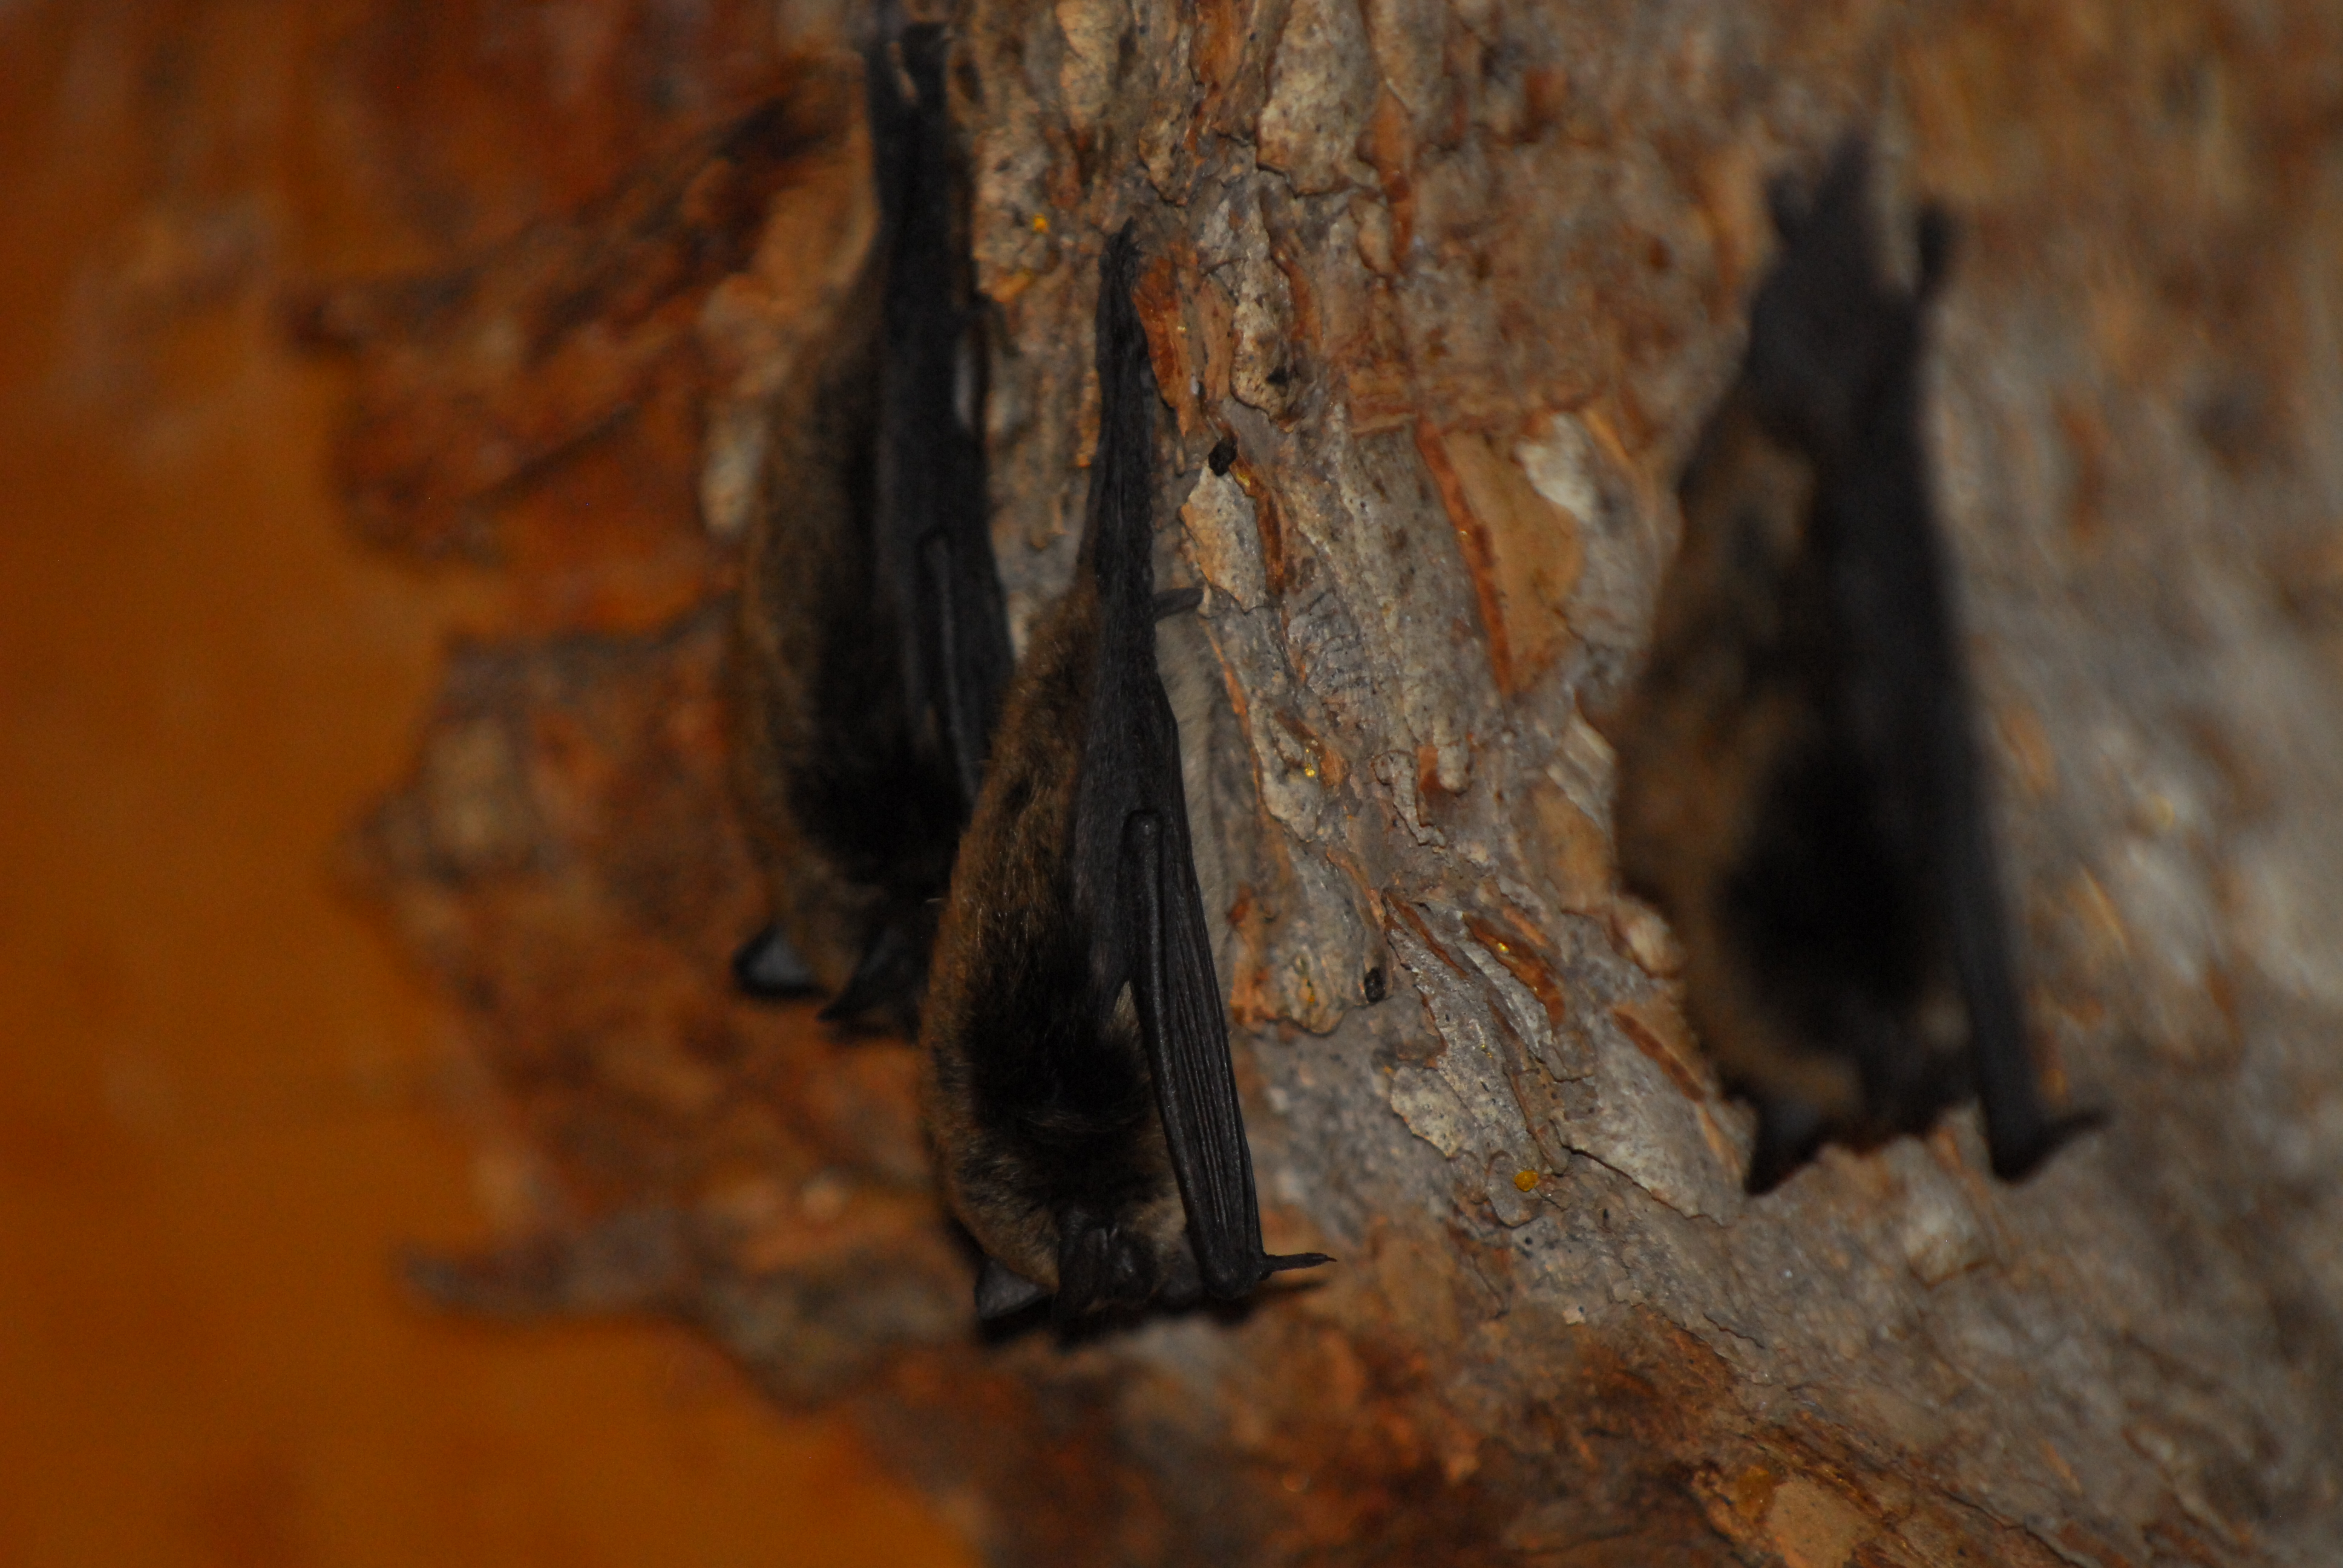 Bats In Attics Might Be Necessary For Conservation The Ecological Society Of America